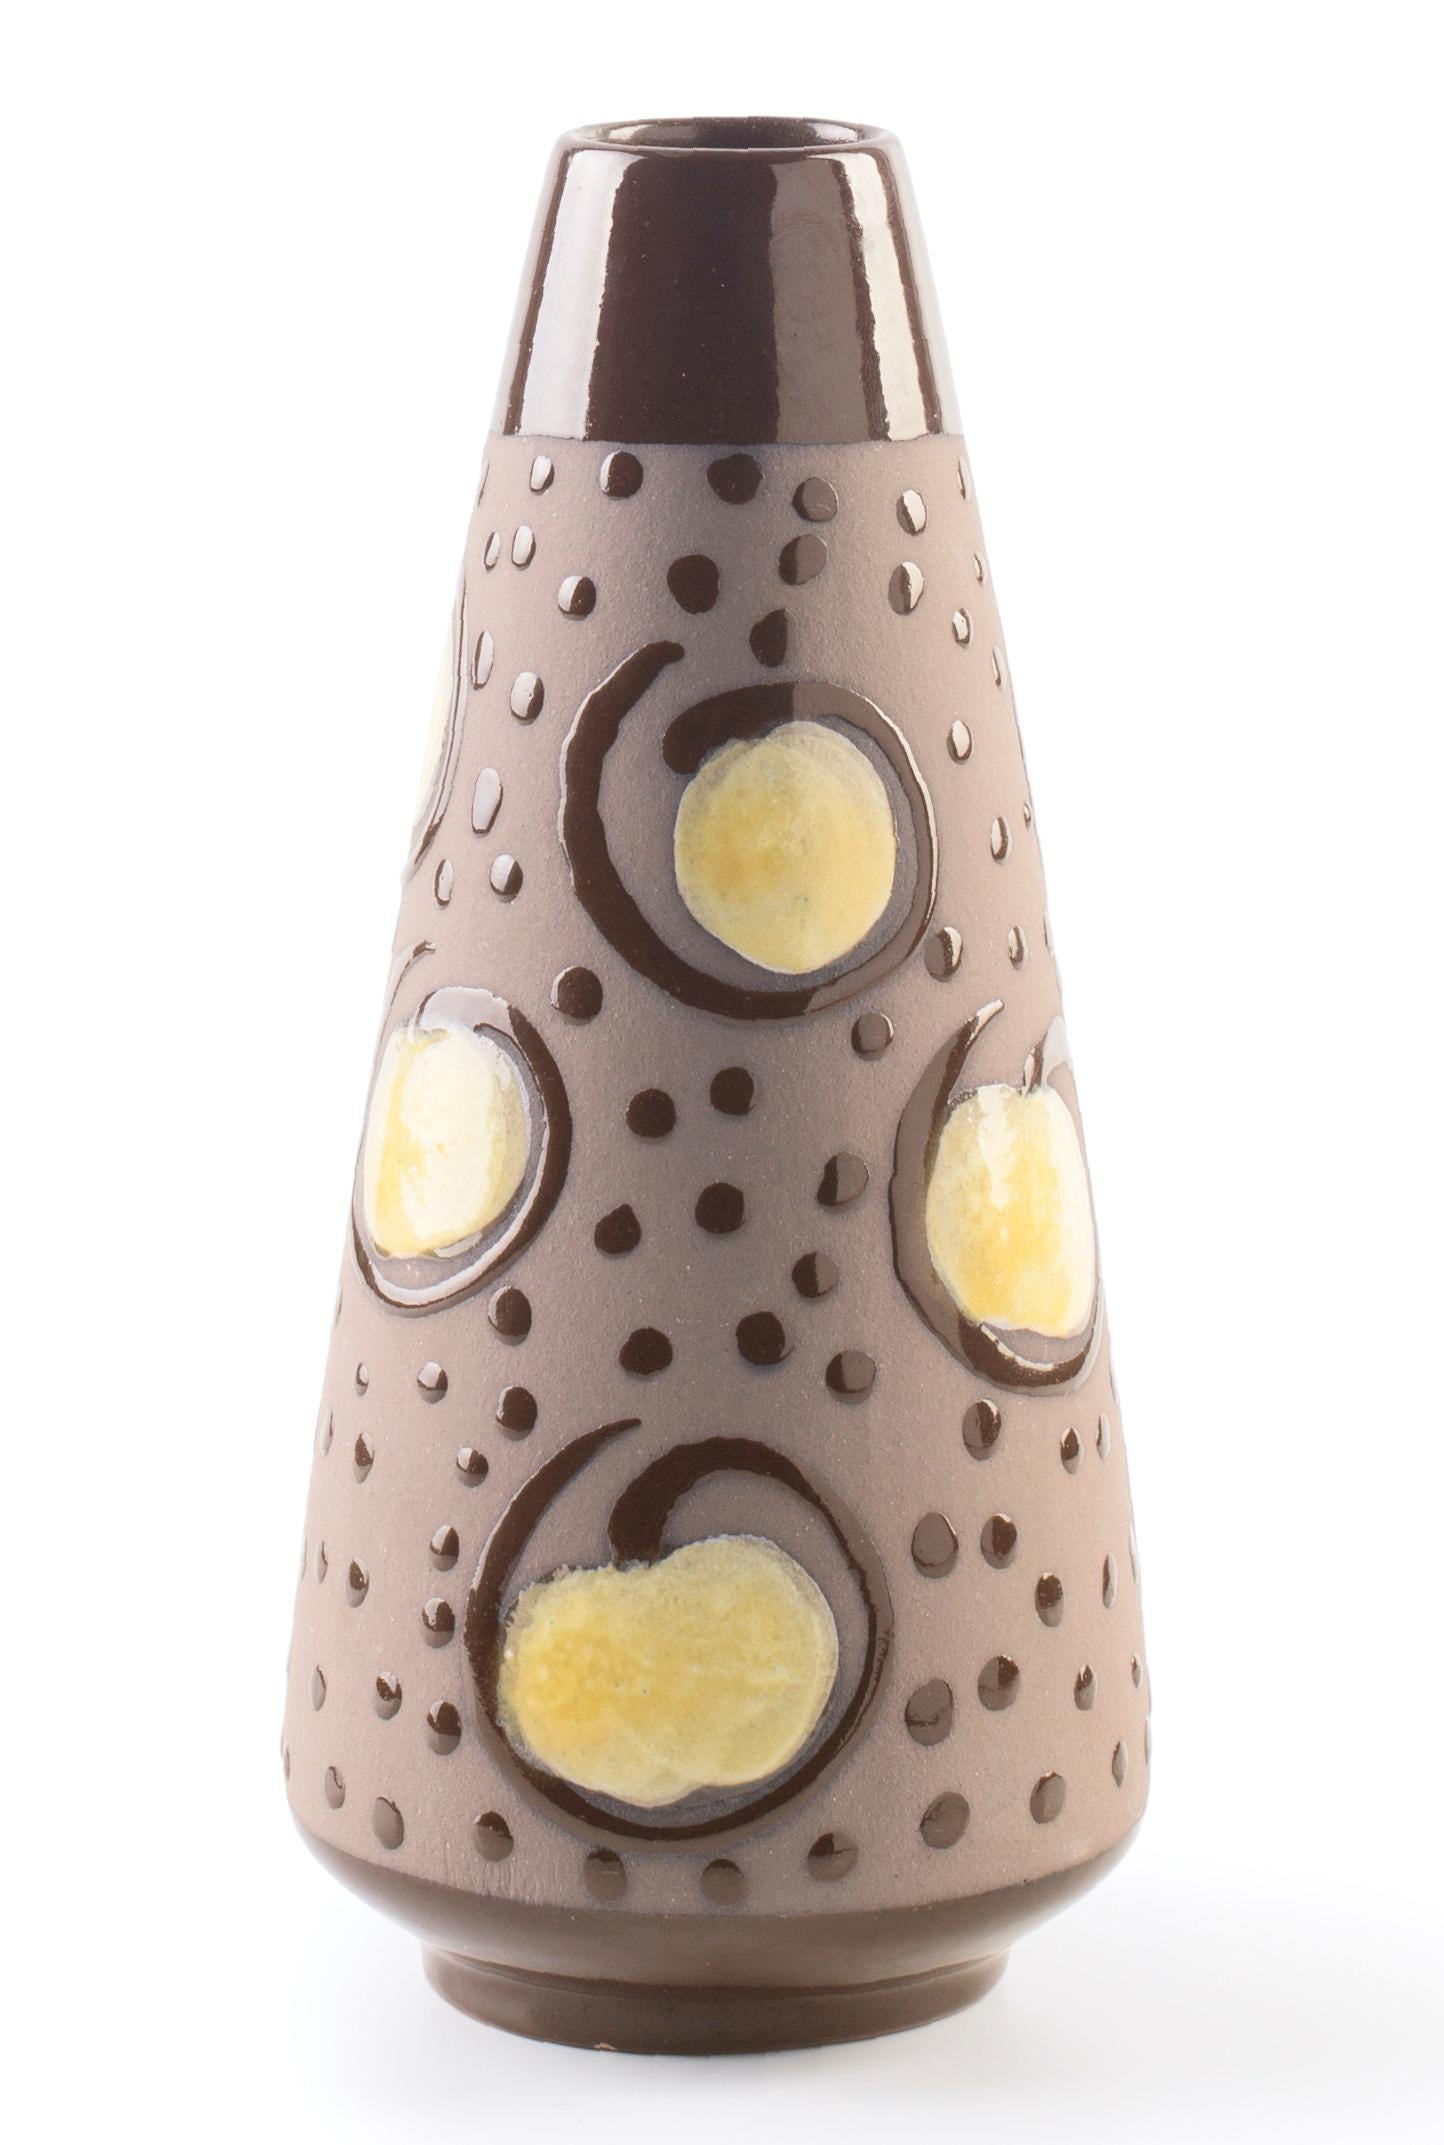 Strehla vintage vase is an original glass vase realized in the 1960s by VEB Sachsen Strehla 

Very good conditions.

This very precious decorative object is a glass vase decorated in variations of brown and yellow spheres. 

The Strehla